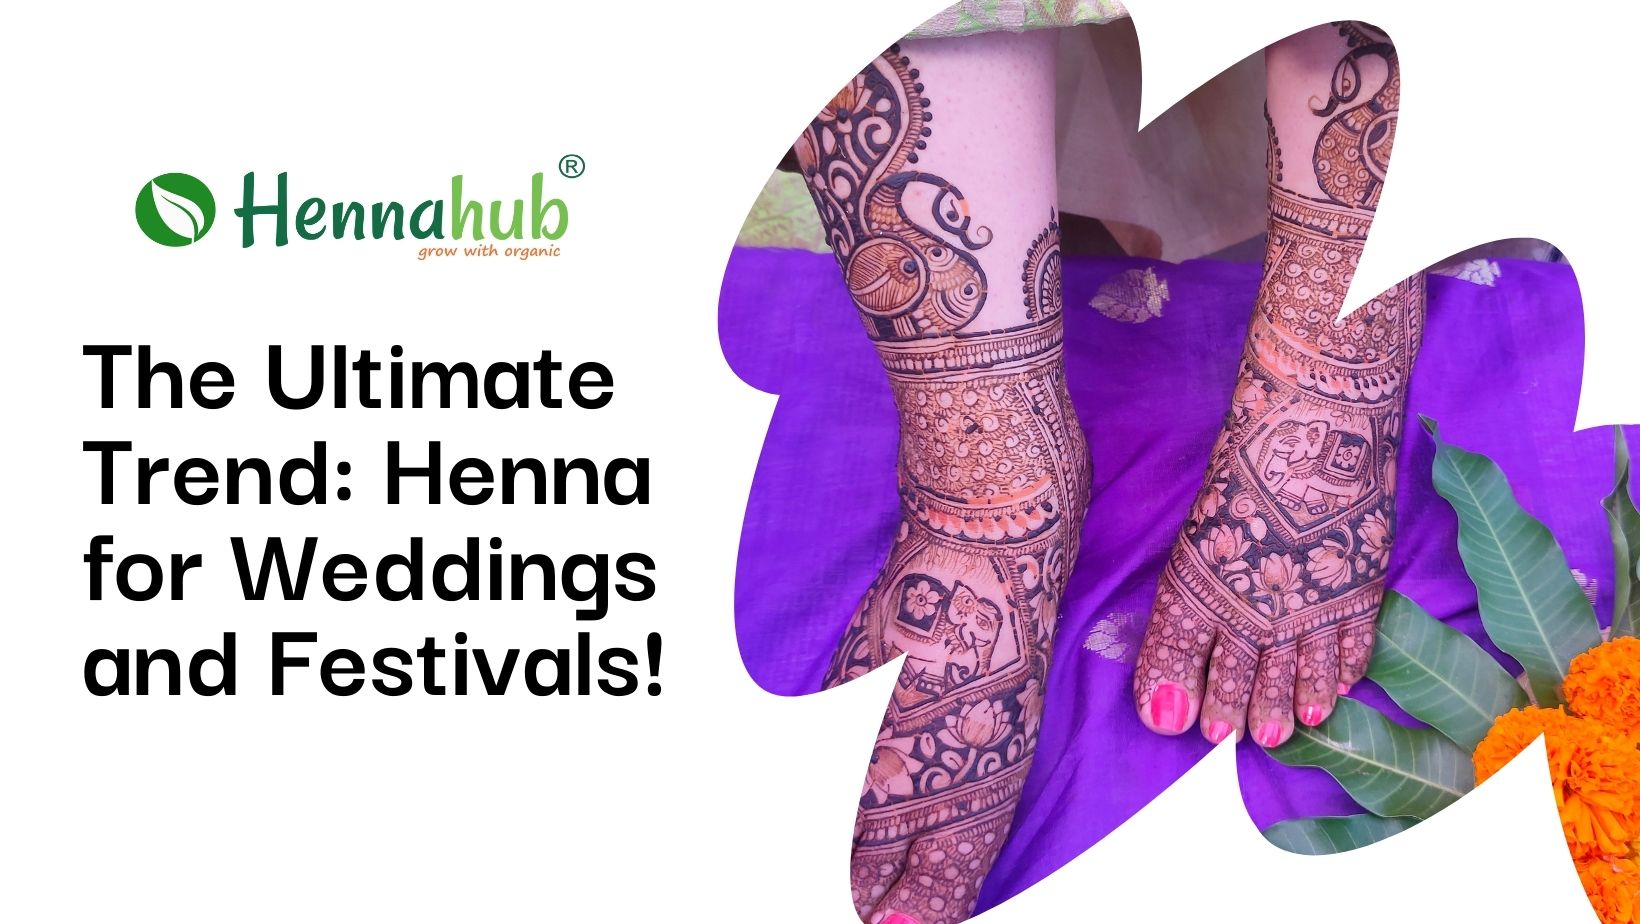 Henna for Events: Weddings, Festivals, and Celebrations – The Ultimate Trend